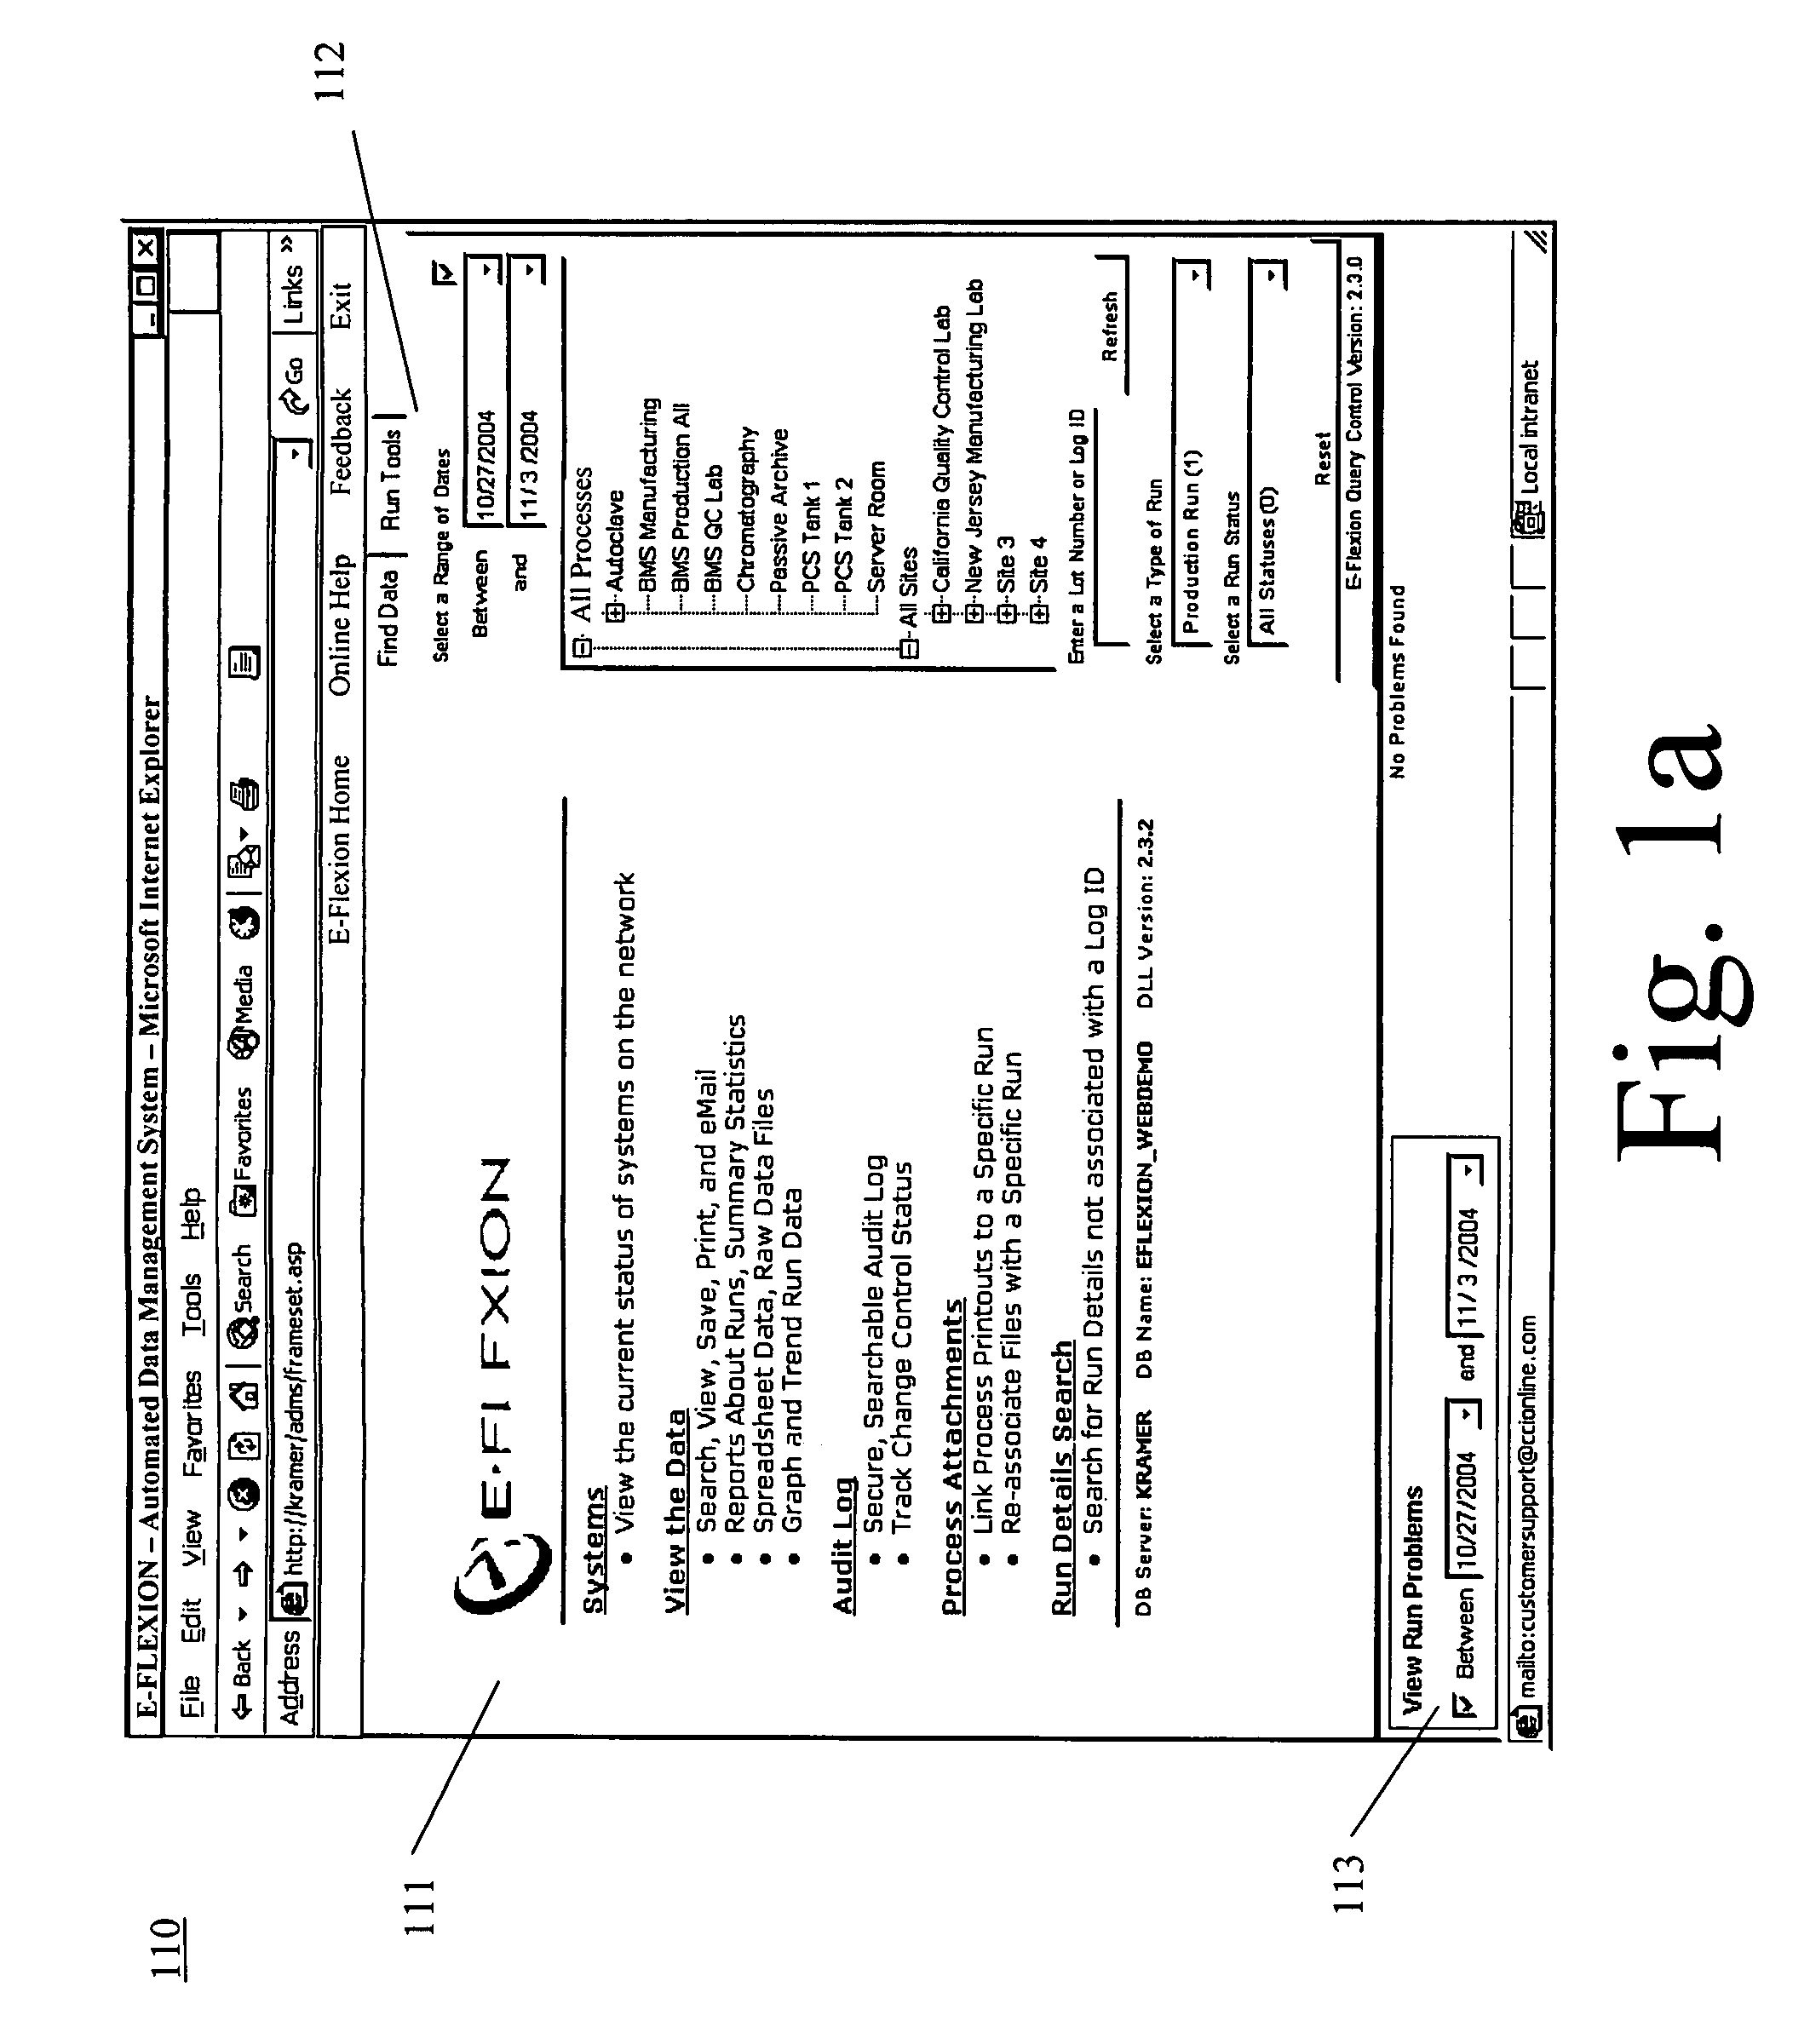 Method of batching and analyzing of data from computerized process and control systems